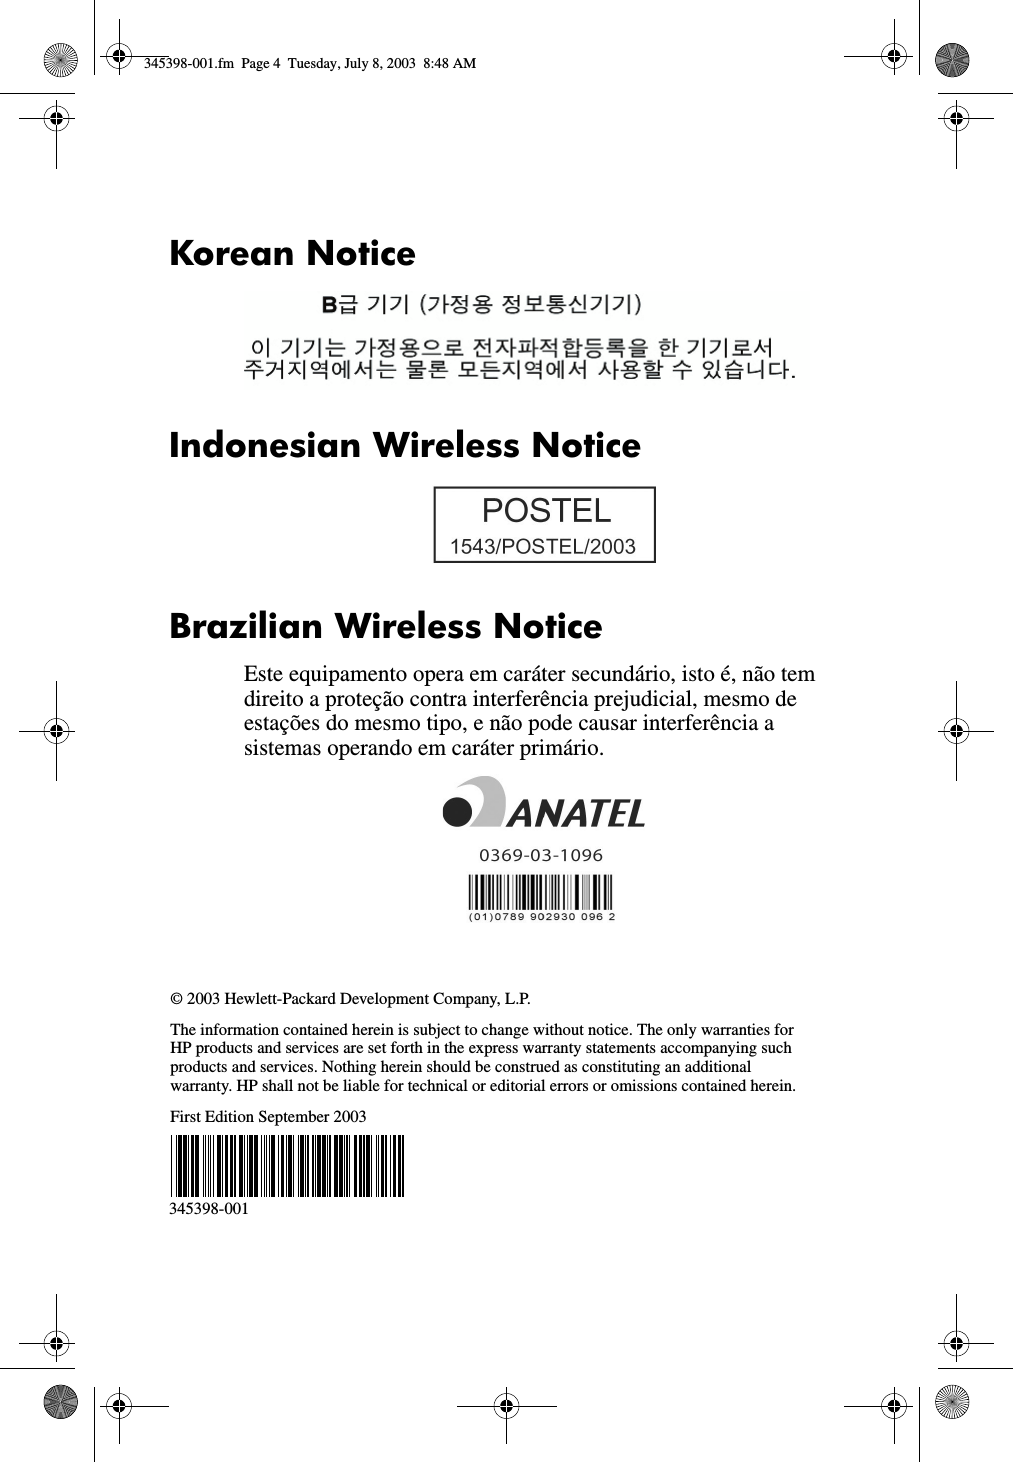 Korean NoticeIndonesian Wireless NoticeBrazilian Wireless NoticeEste equipamento opera em caráter secundário, isto é, não tem direito a proteção contra interferência prejudicial, mesmo de estações do mesmo tipo, e não pode causar interferência a sistemas operando em caráter primário.© 2003 Hewlett-Packard Development Company, L.P.The information contained herein is subject to change without notice. The only warranties for HP products and services are set forth in the express warranty statements accompanying such products and services. Nothing herein should be construed as constituting an additional warranty. HP shall not be liable for technical or editorial errors or omissions contained herein.First Edition September 2003345398-001345398-001.fm  Page 4  Tuesday, July 8, 2003  8:48 AM